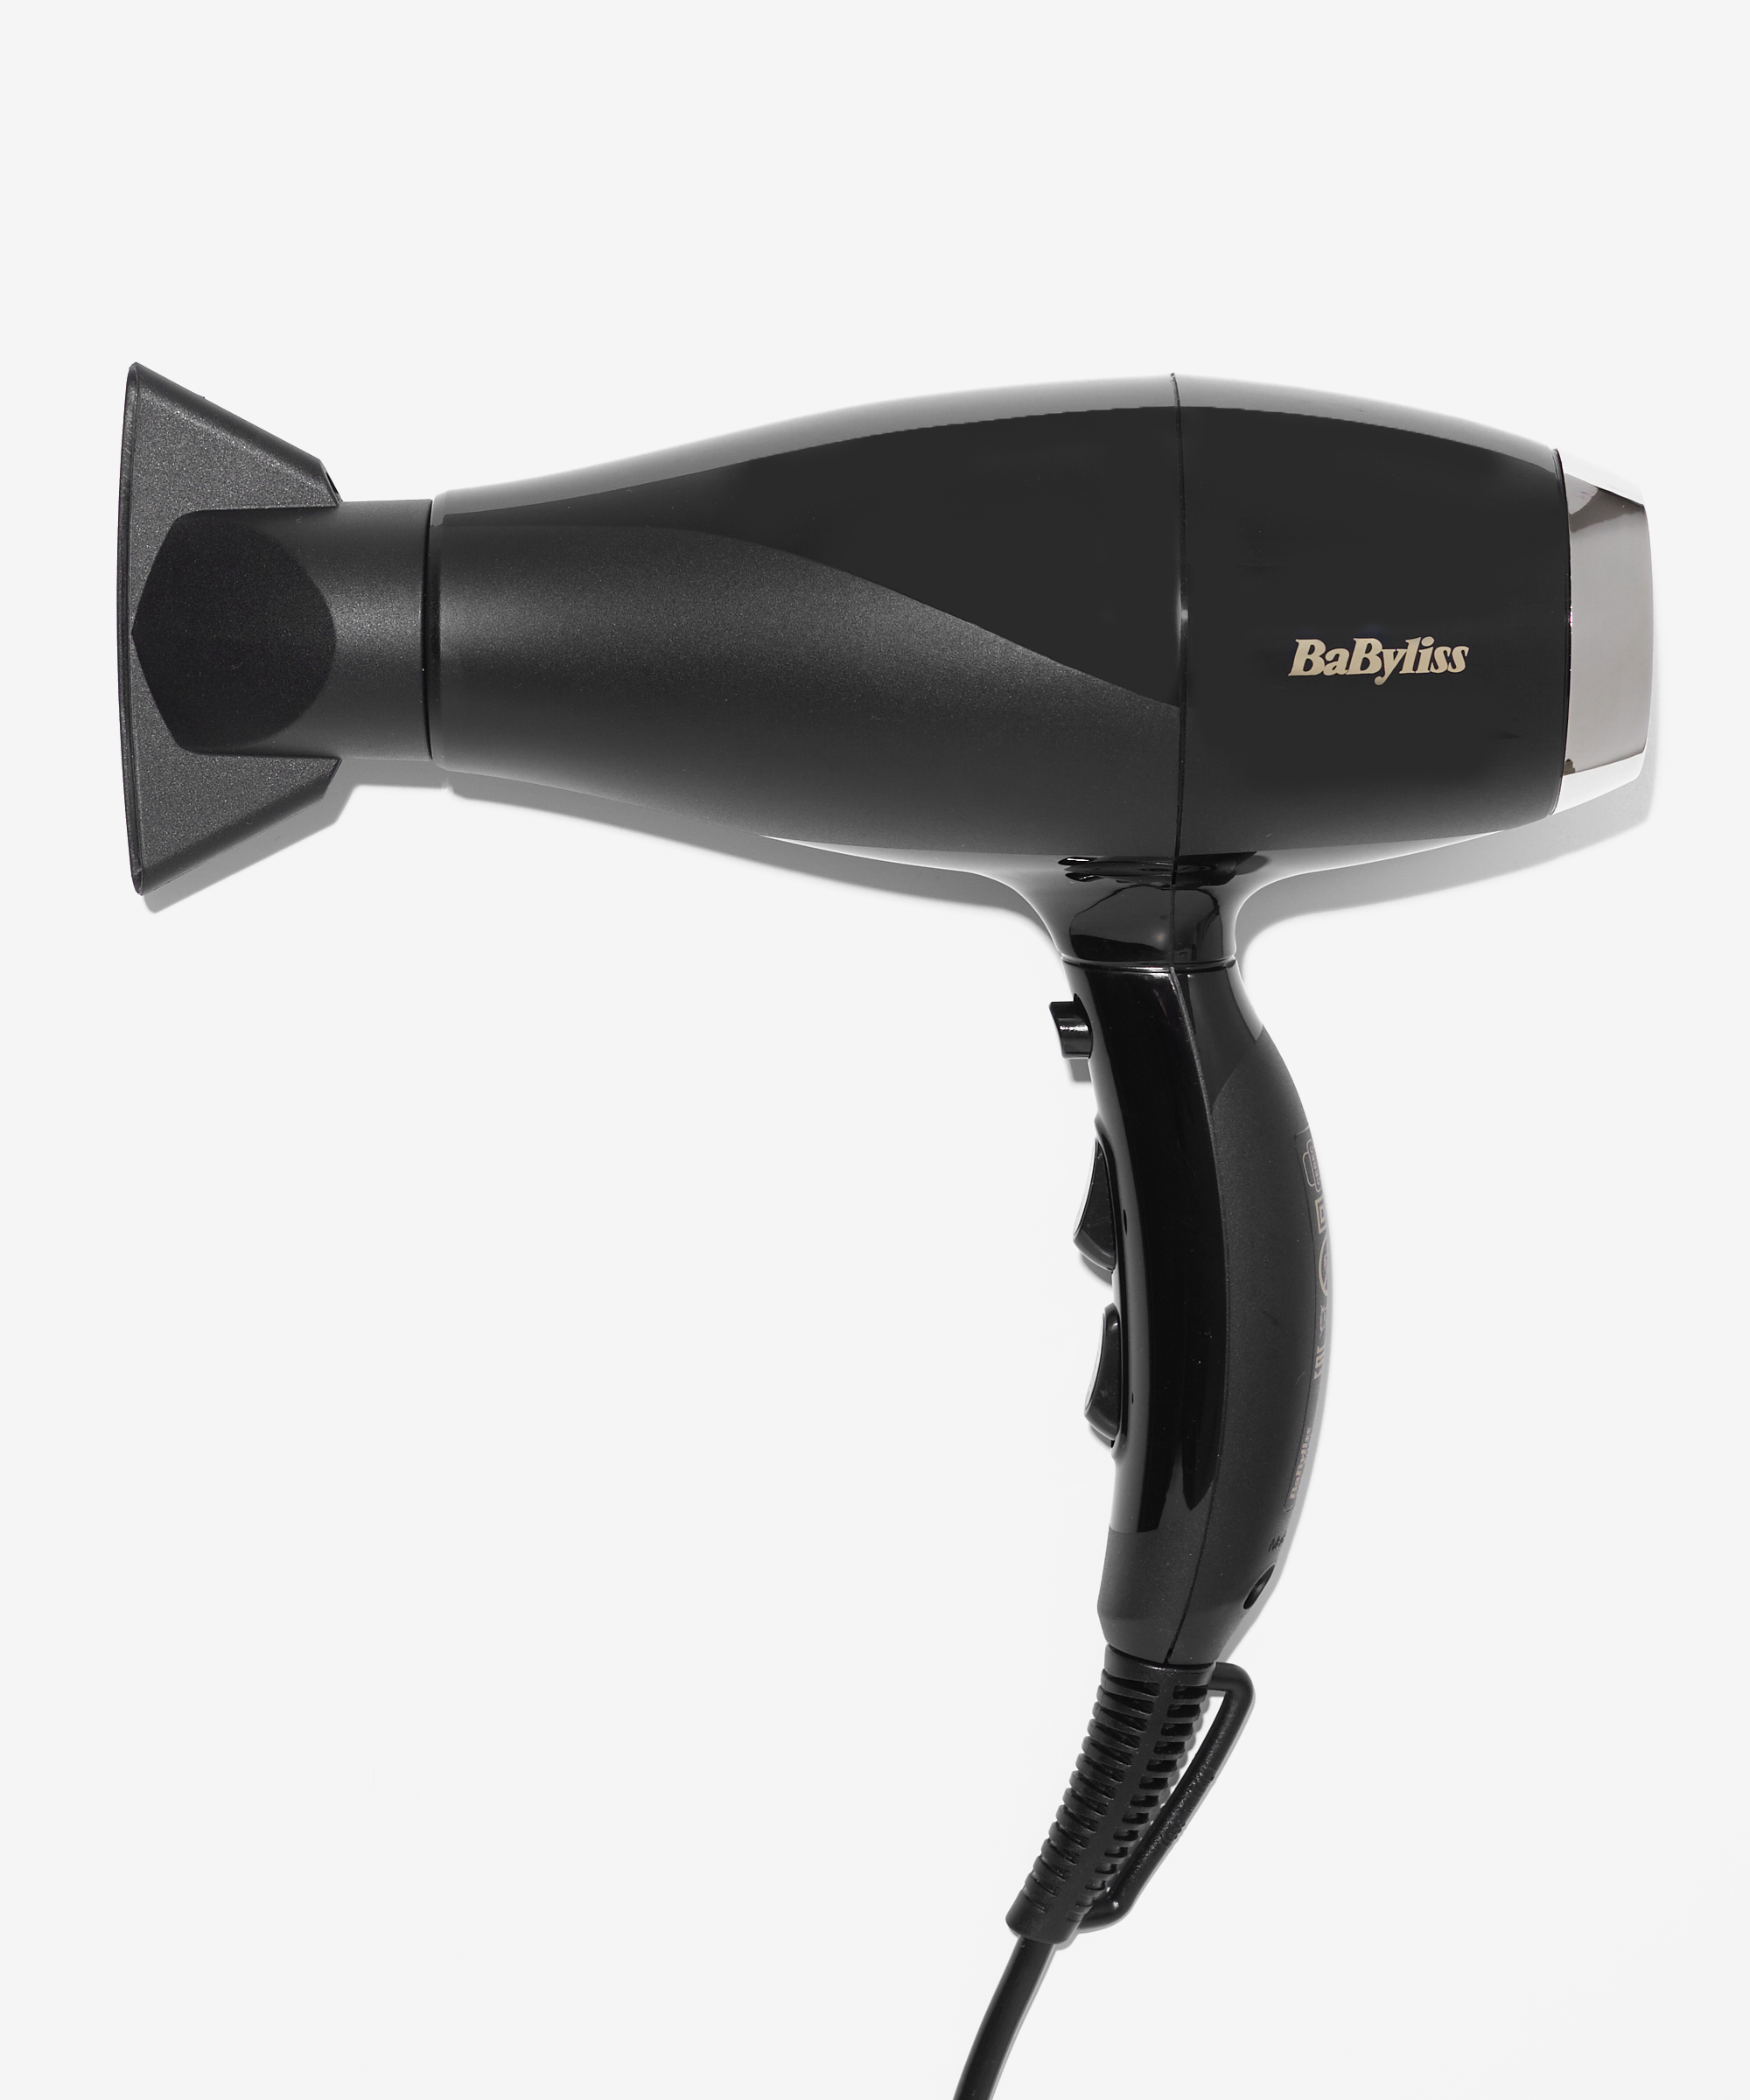 BaByliss Air 2300 BAY Hair Dryer BEAUTY Pro at